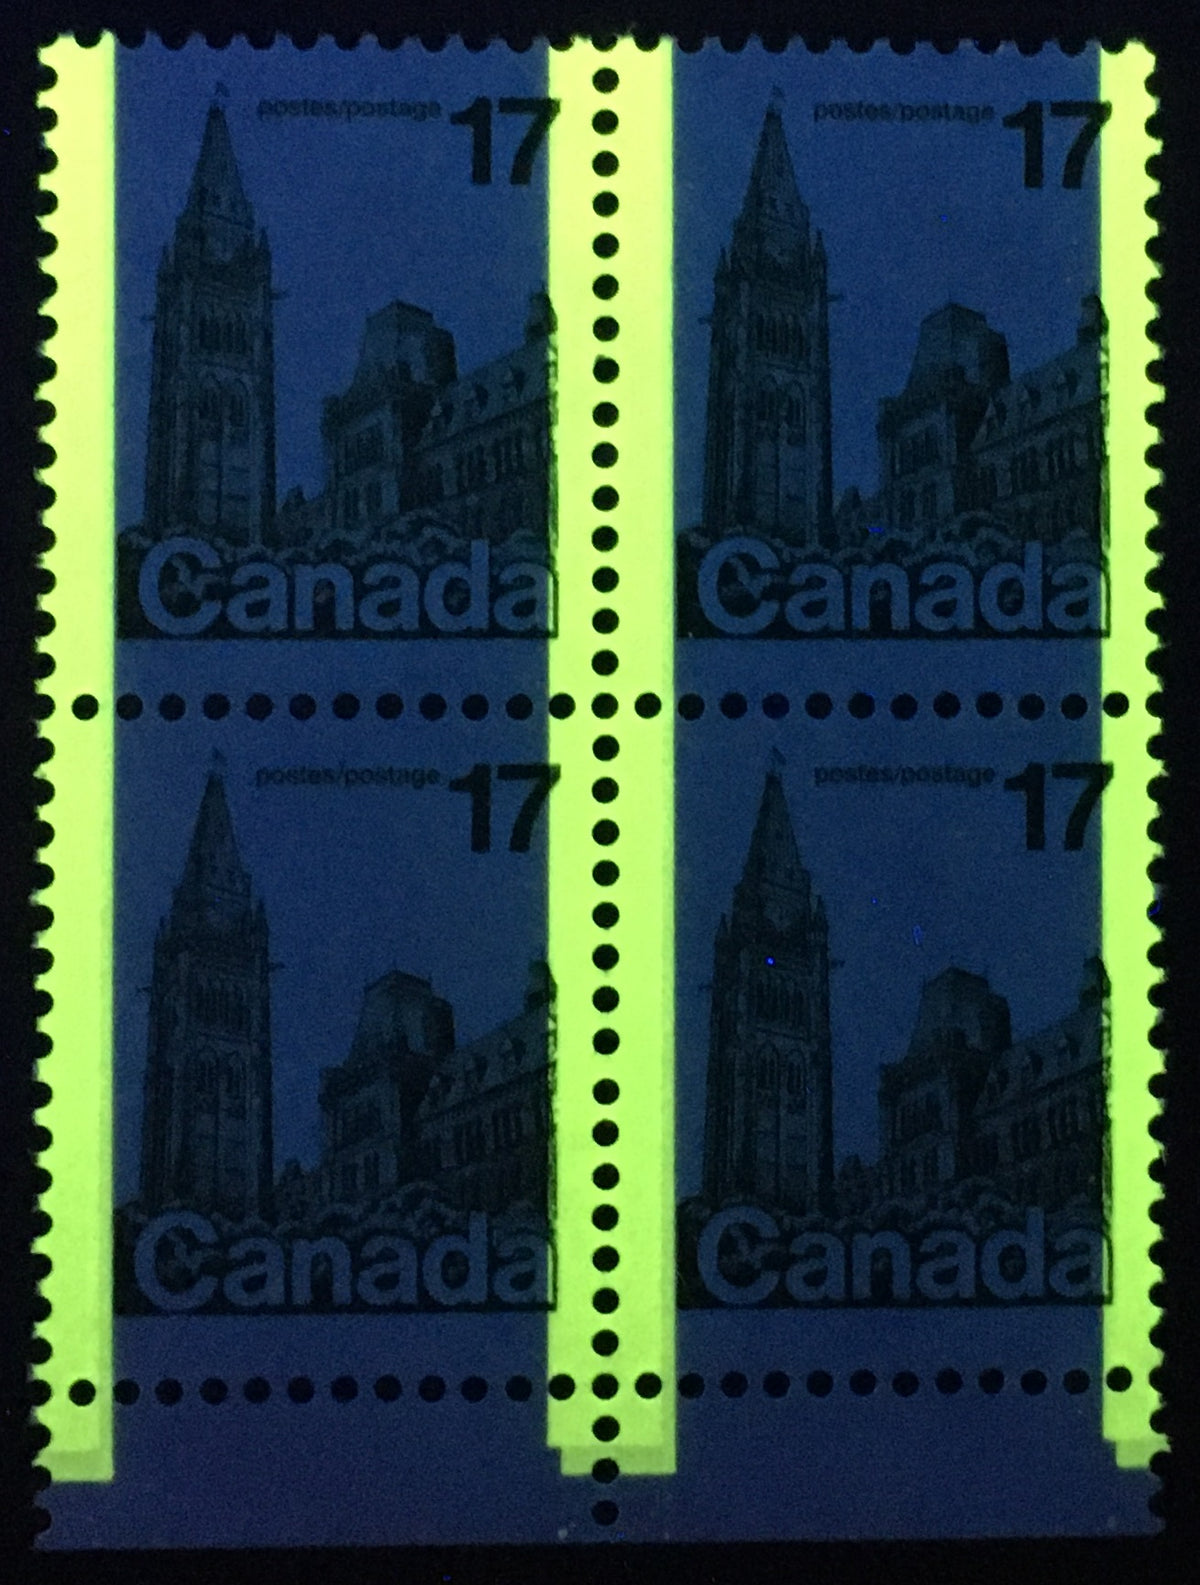 0790CA2007 - Canada #790 - Mint Block of 4, Double Tagging Variety